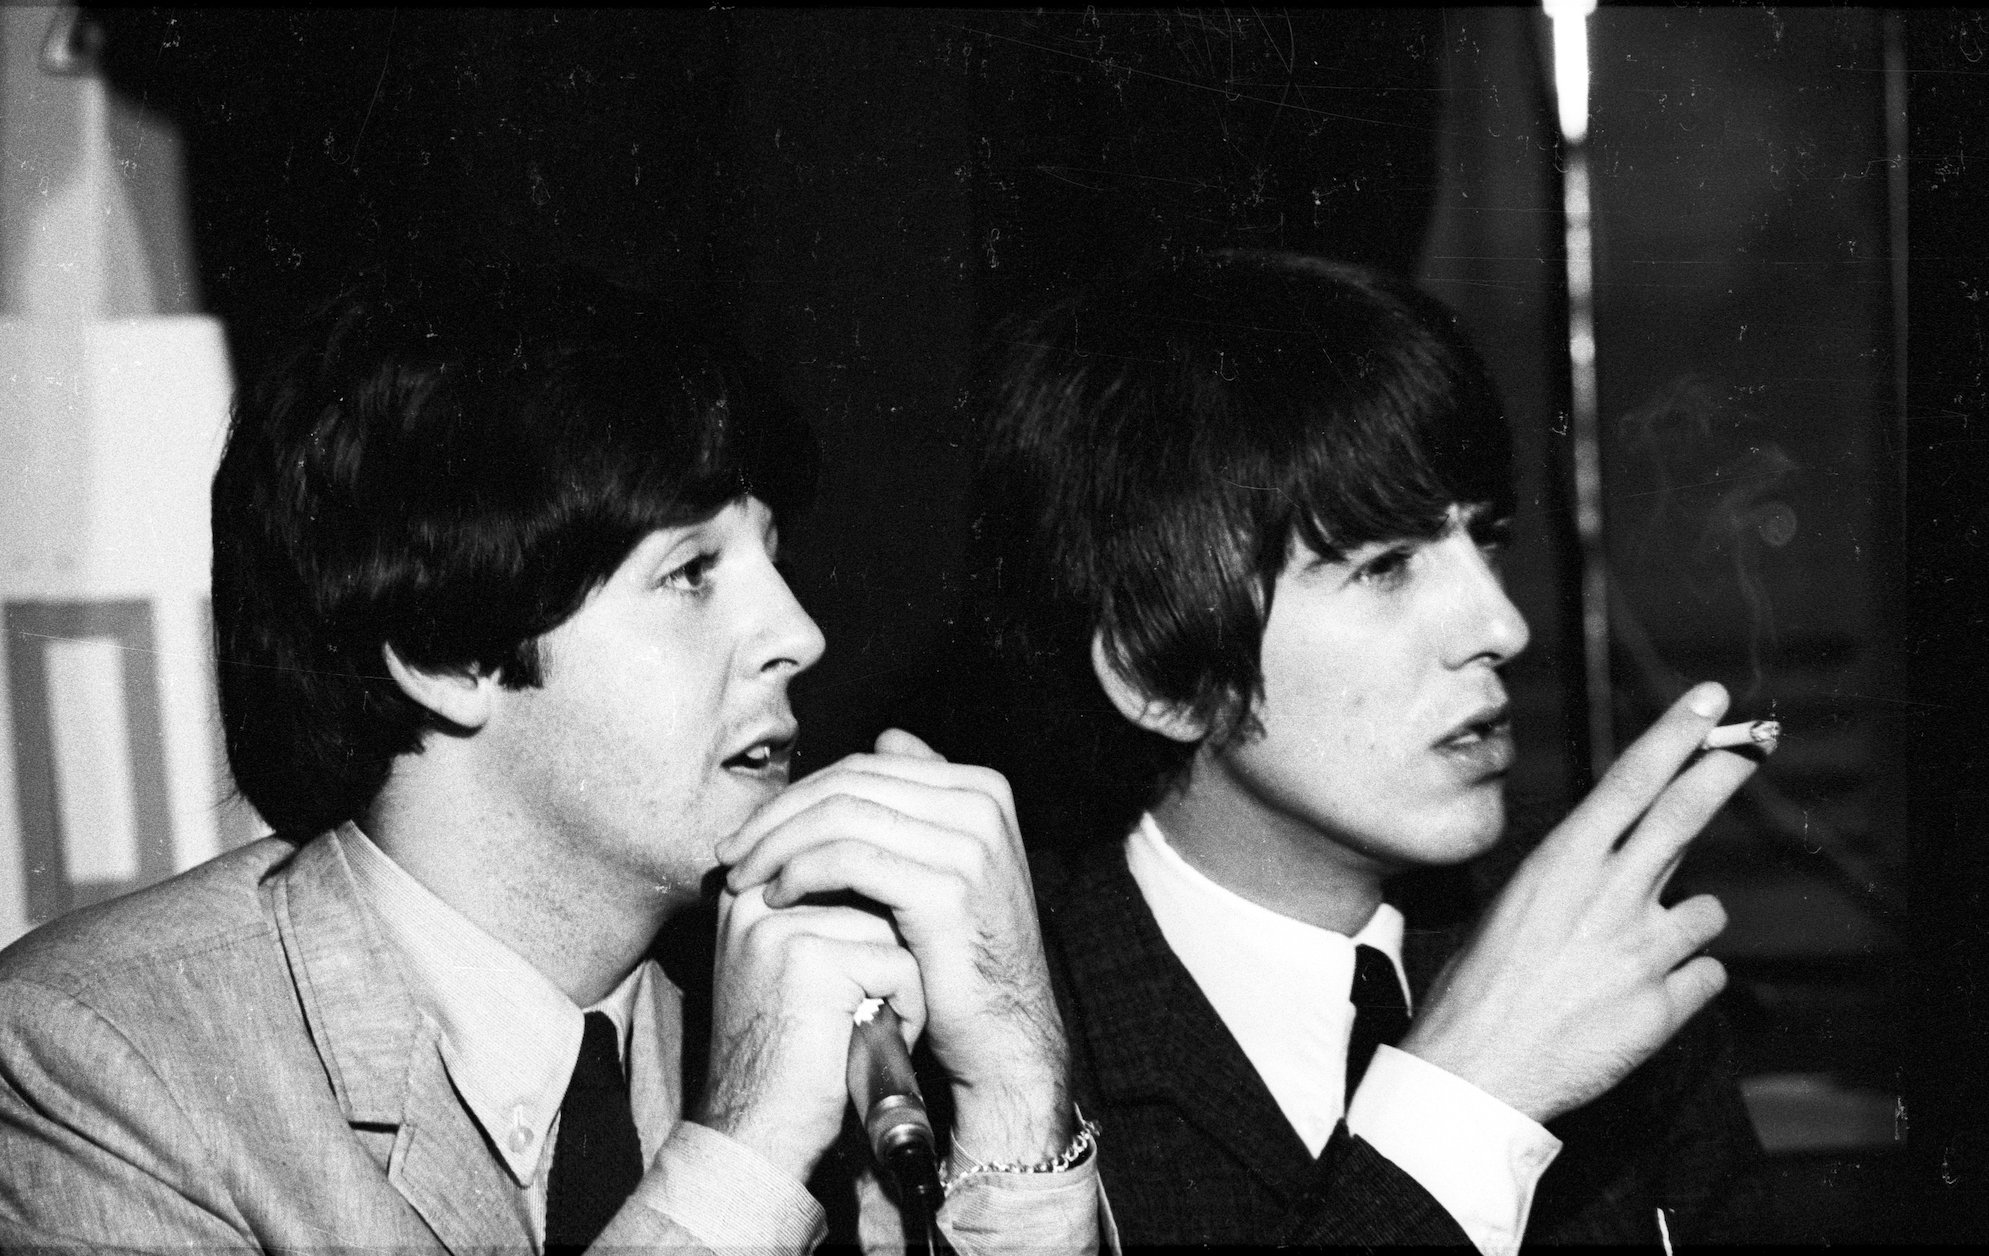 Paul McCartney and George Harrison of The Beatles at a press conference in 1964